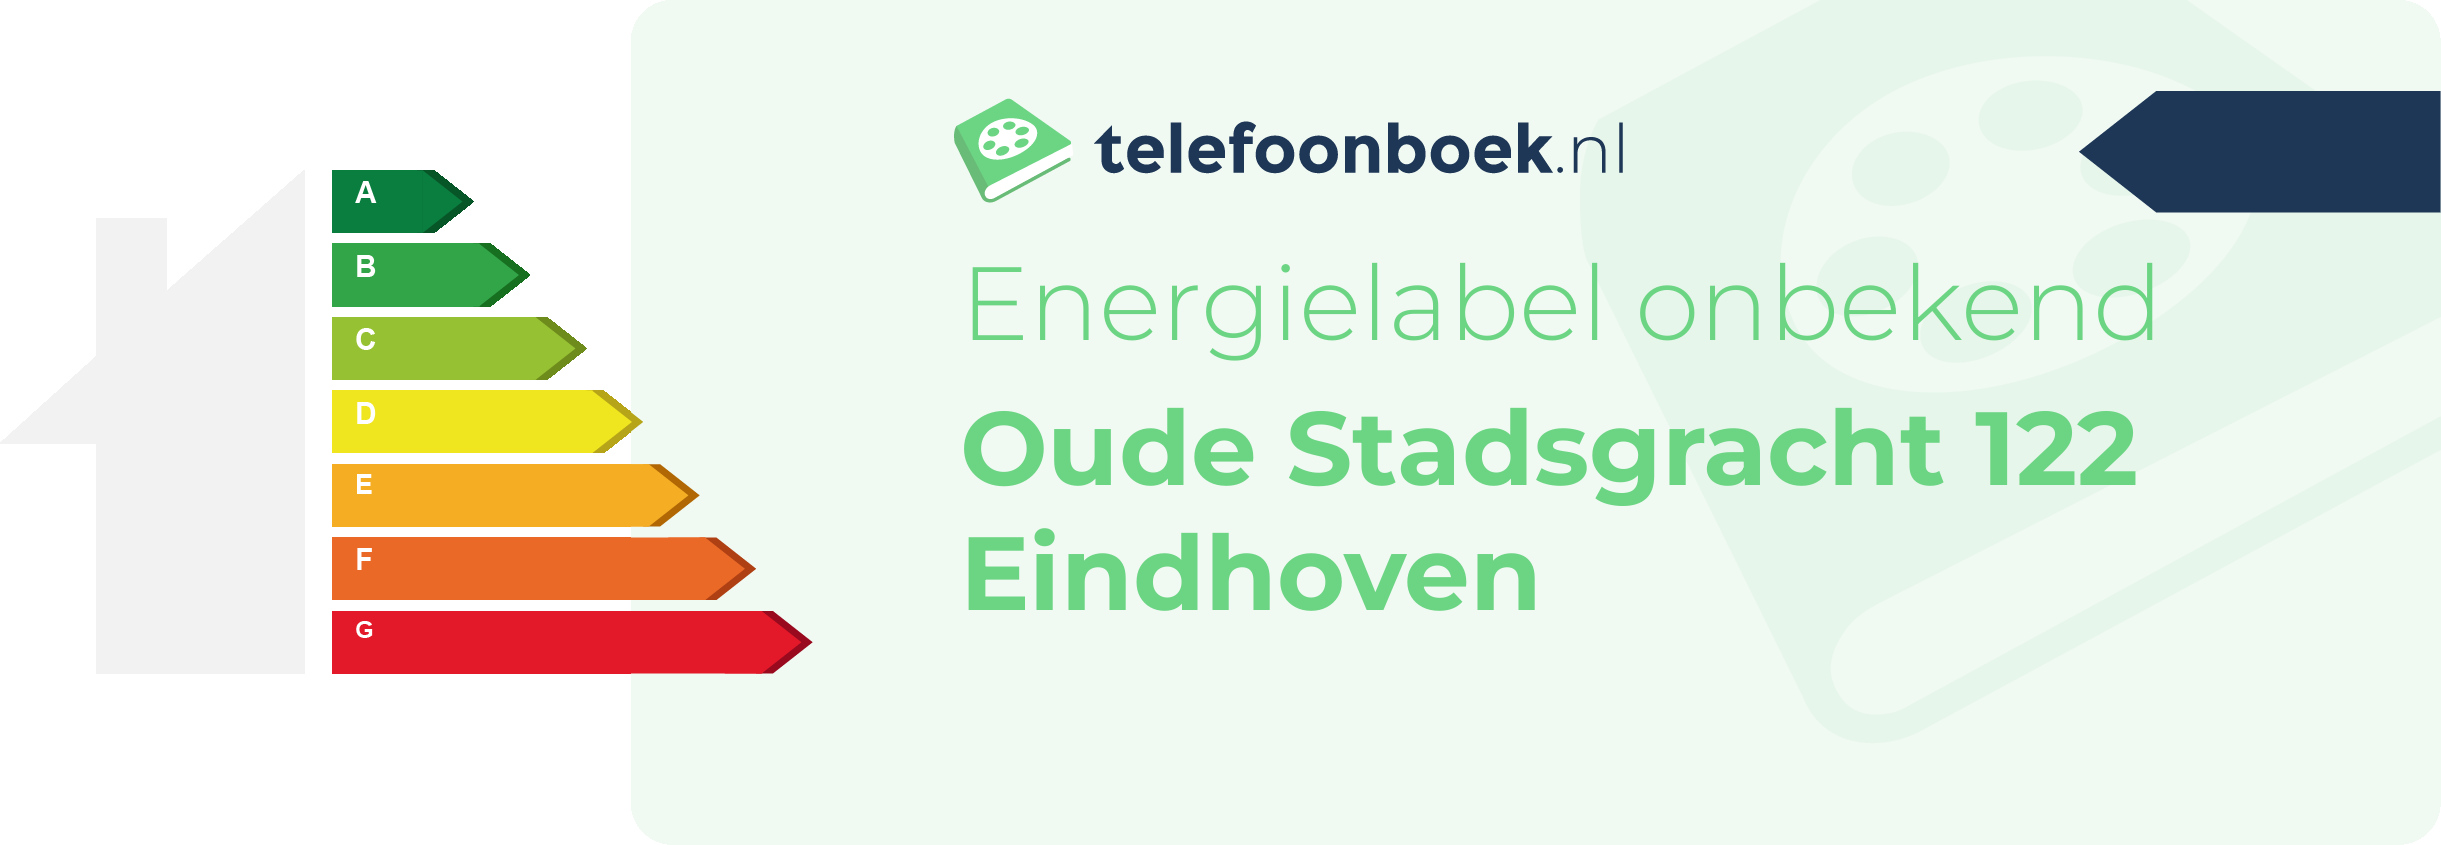 Energielabel Oude Stadsgracht 122 Eindhoven